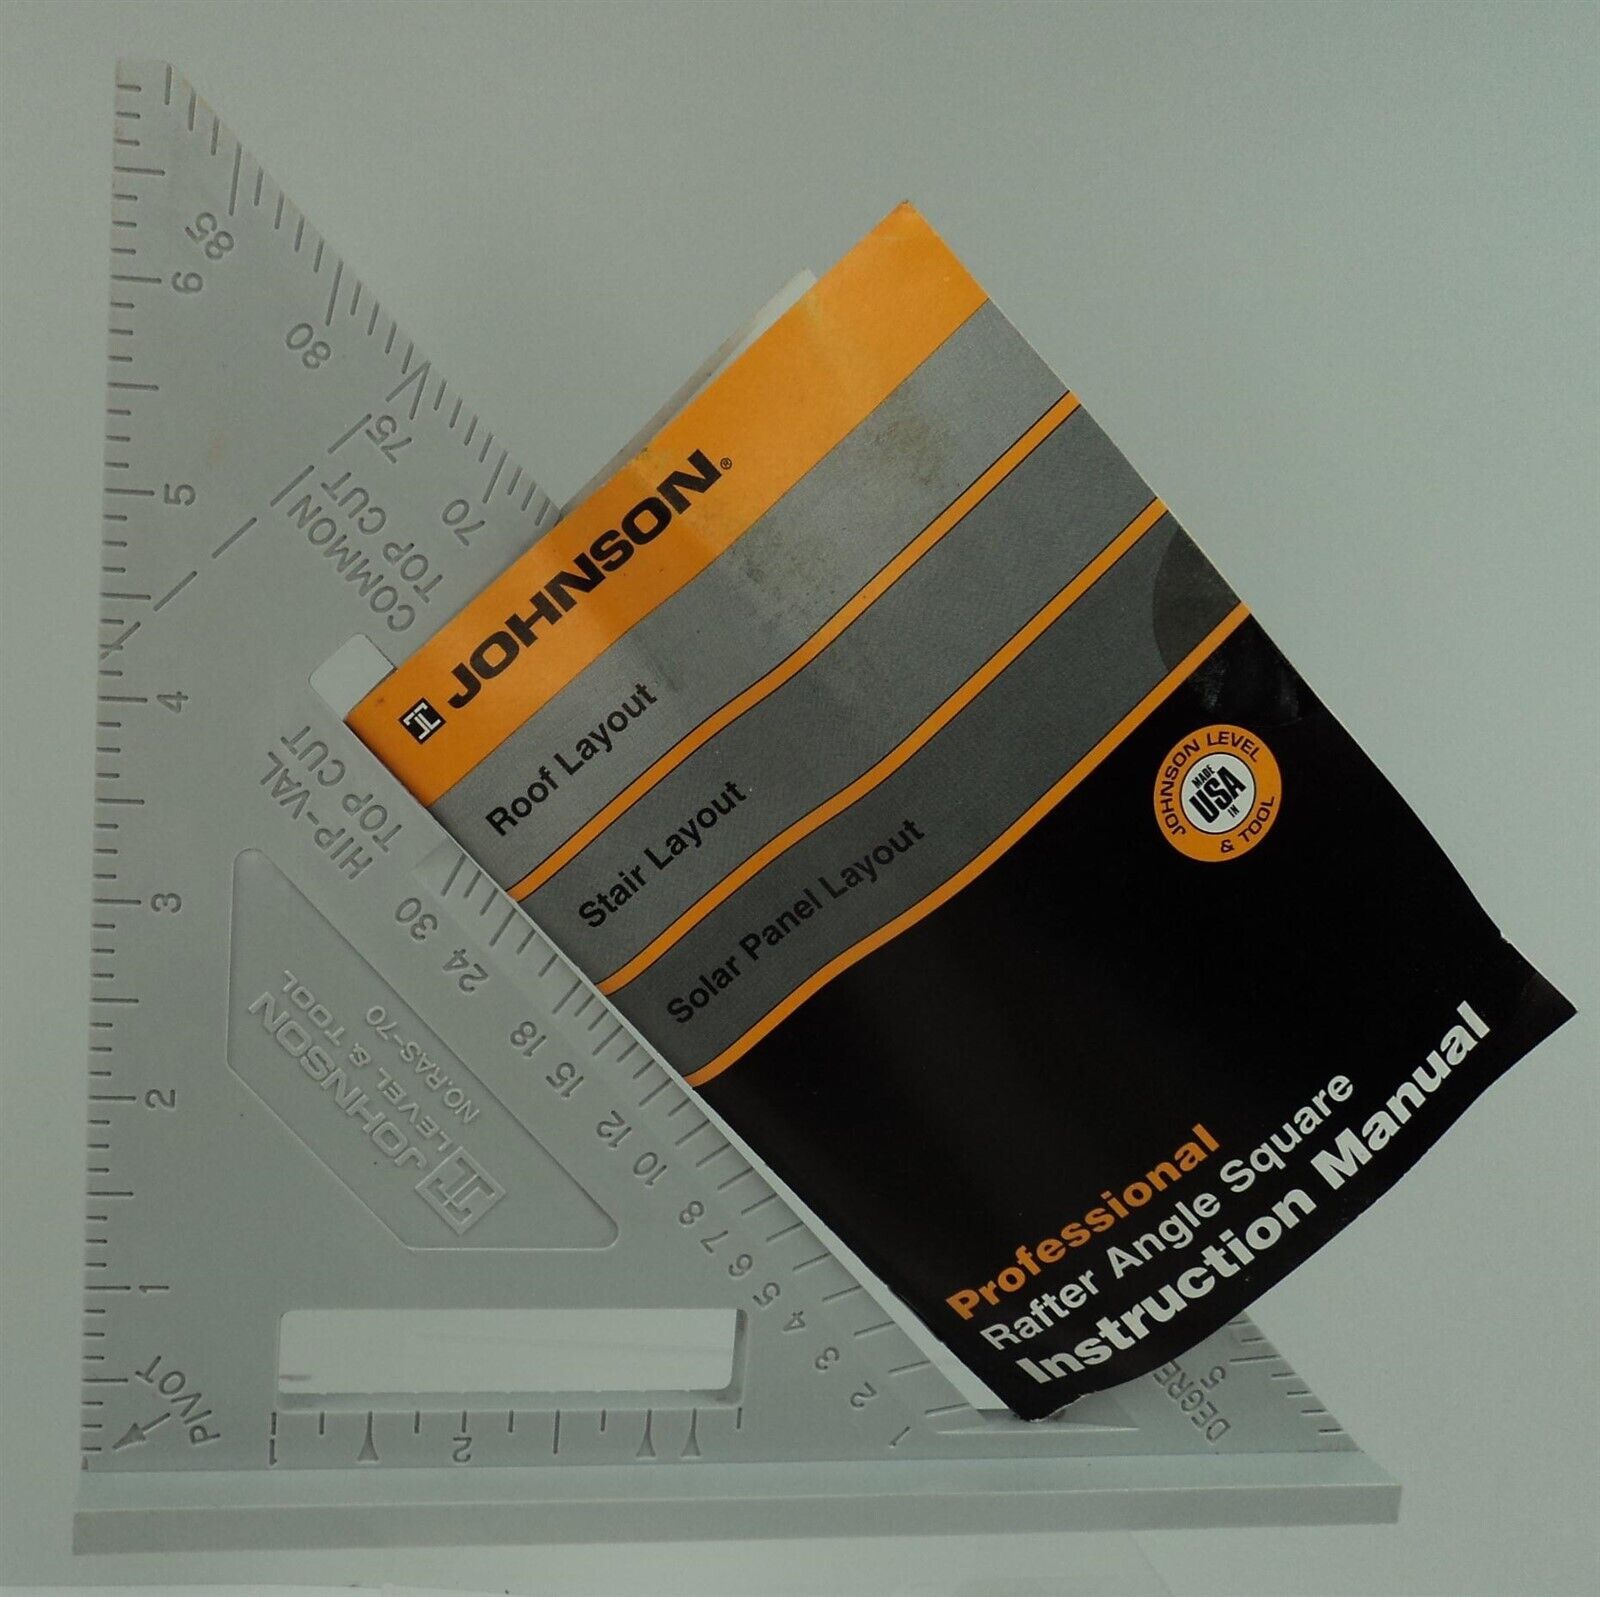 Johnson Professional 7" Rafter Angle Square RAS-70 - New w/ Instruction Manual - $8.79